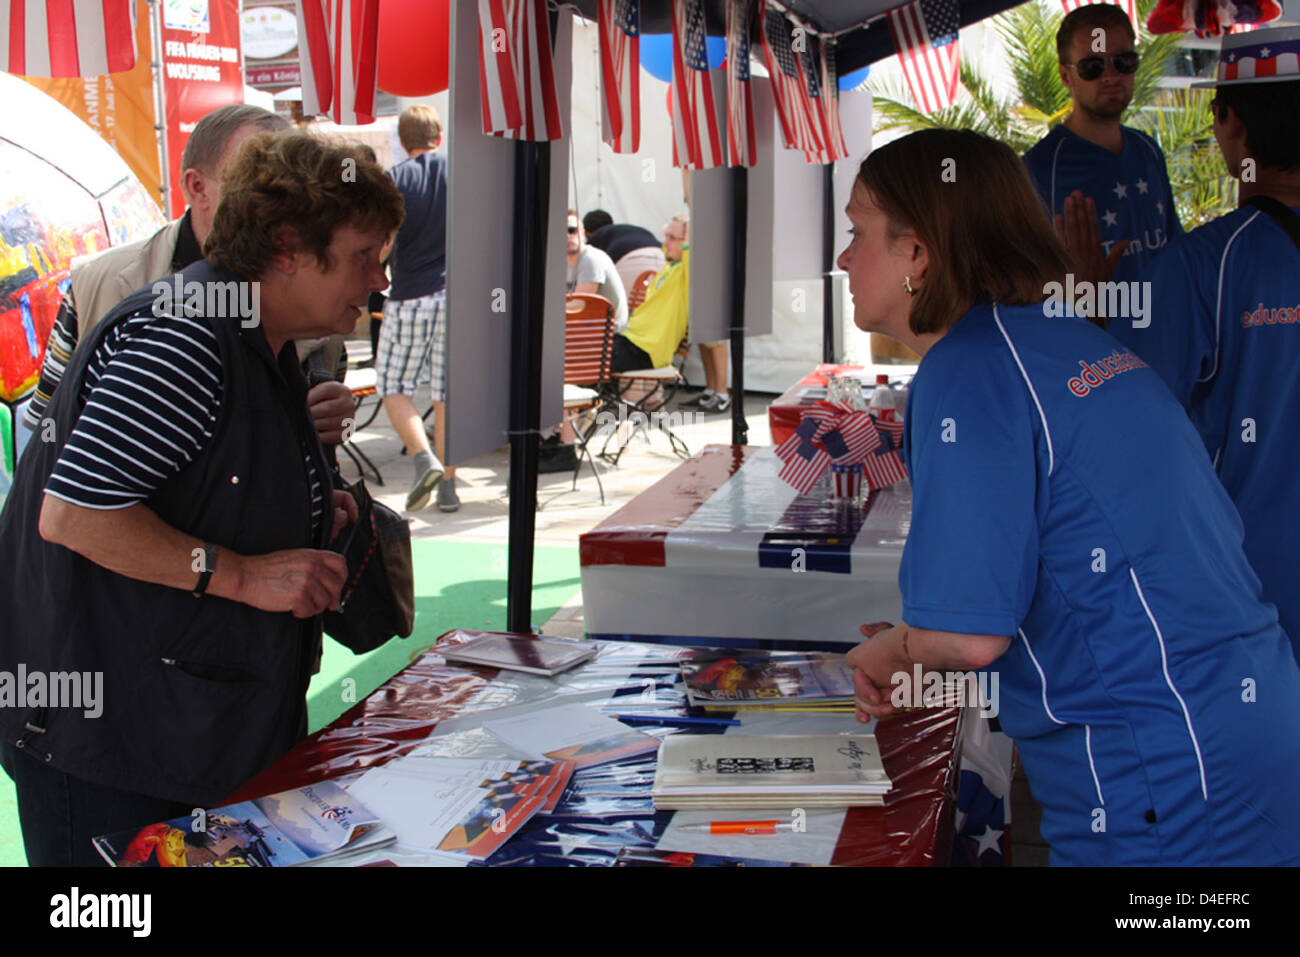 Cultural Affairs Assistant Gerda MierswaSilva speaks with guests at the Consulate Booth at the 'Fanmeile' Stock Photo